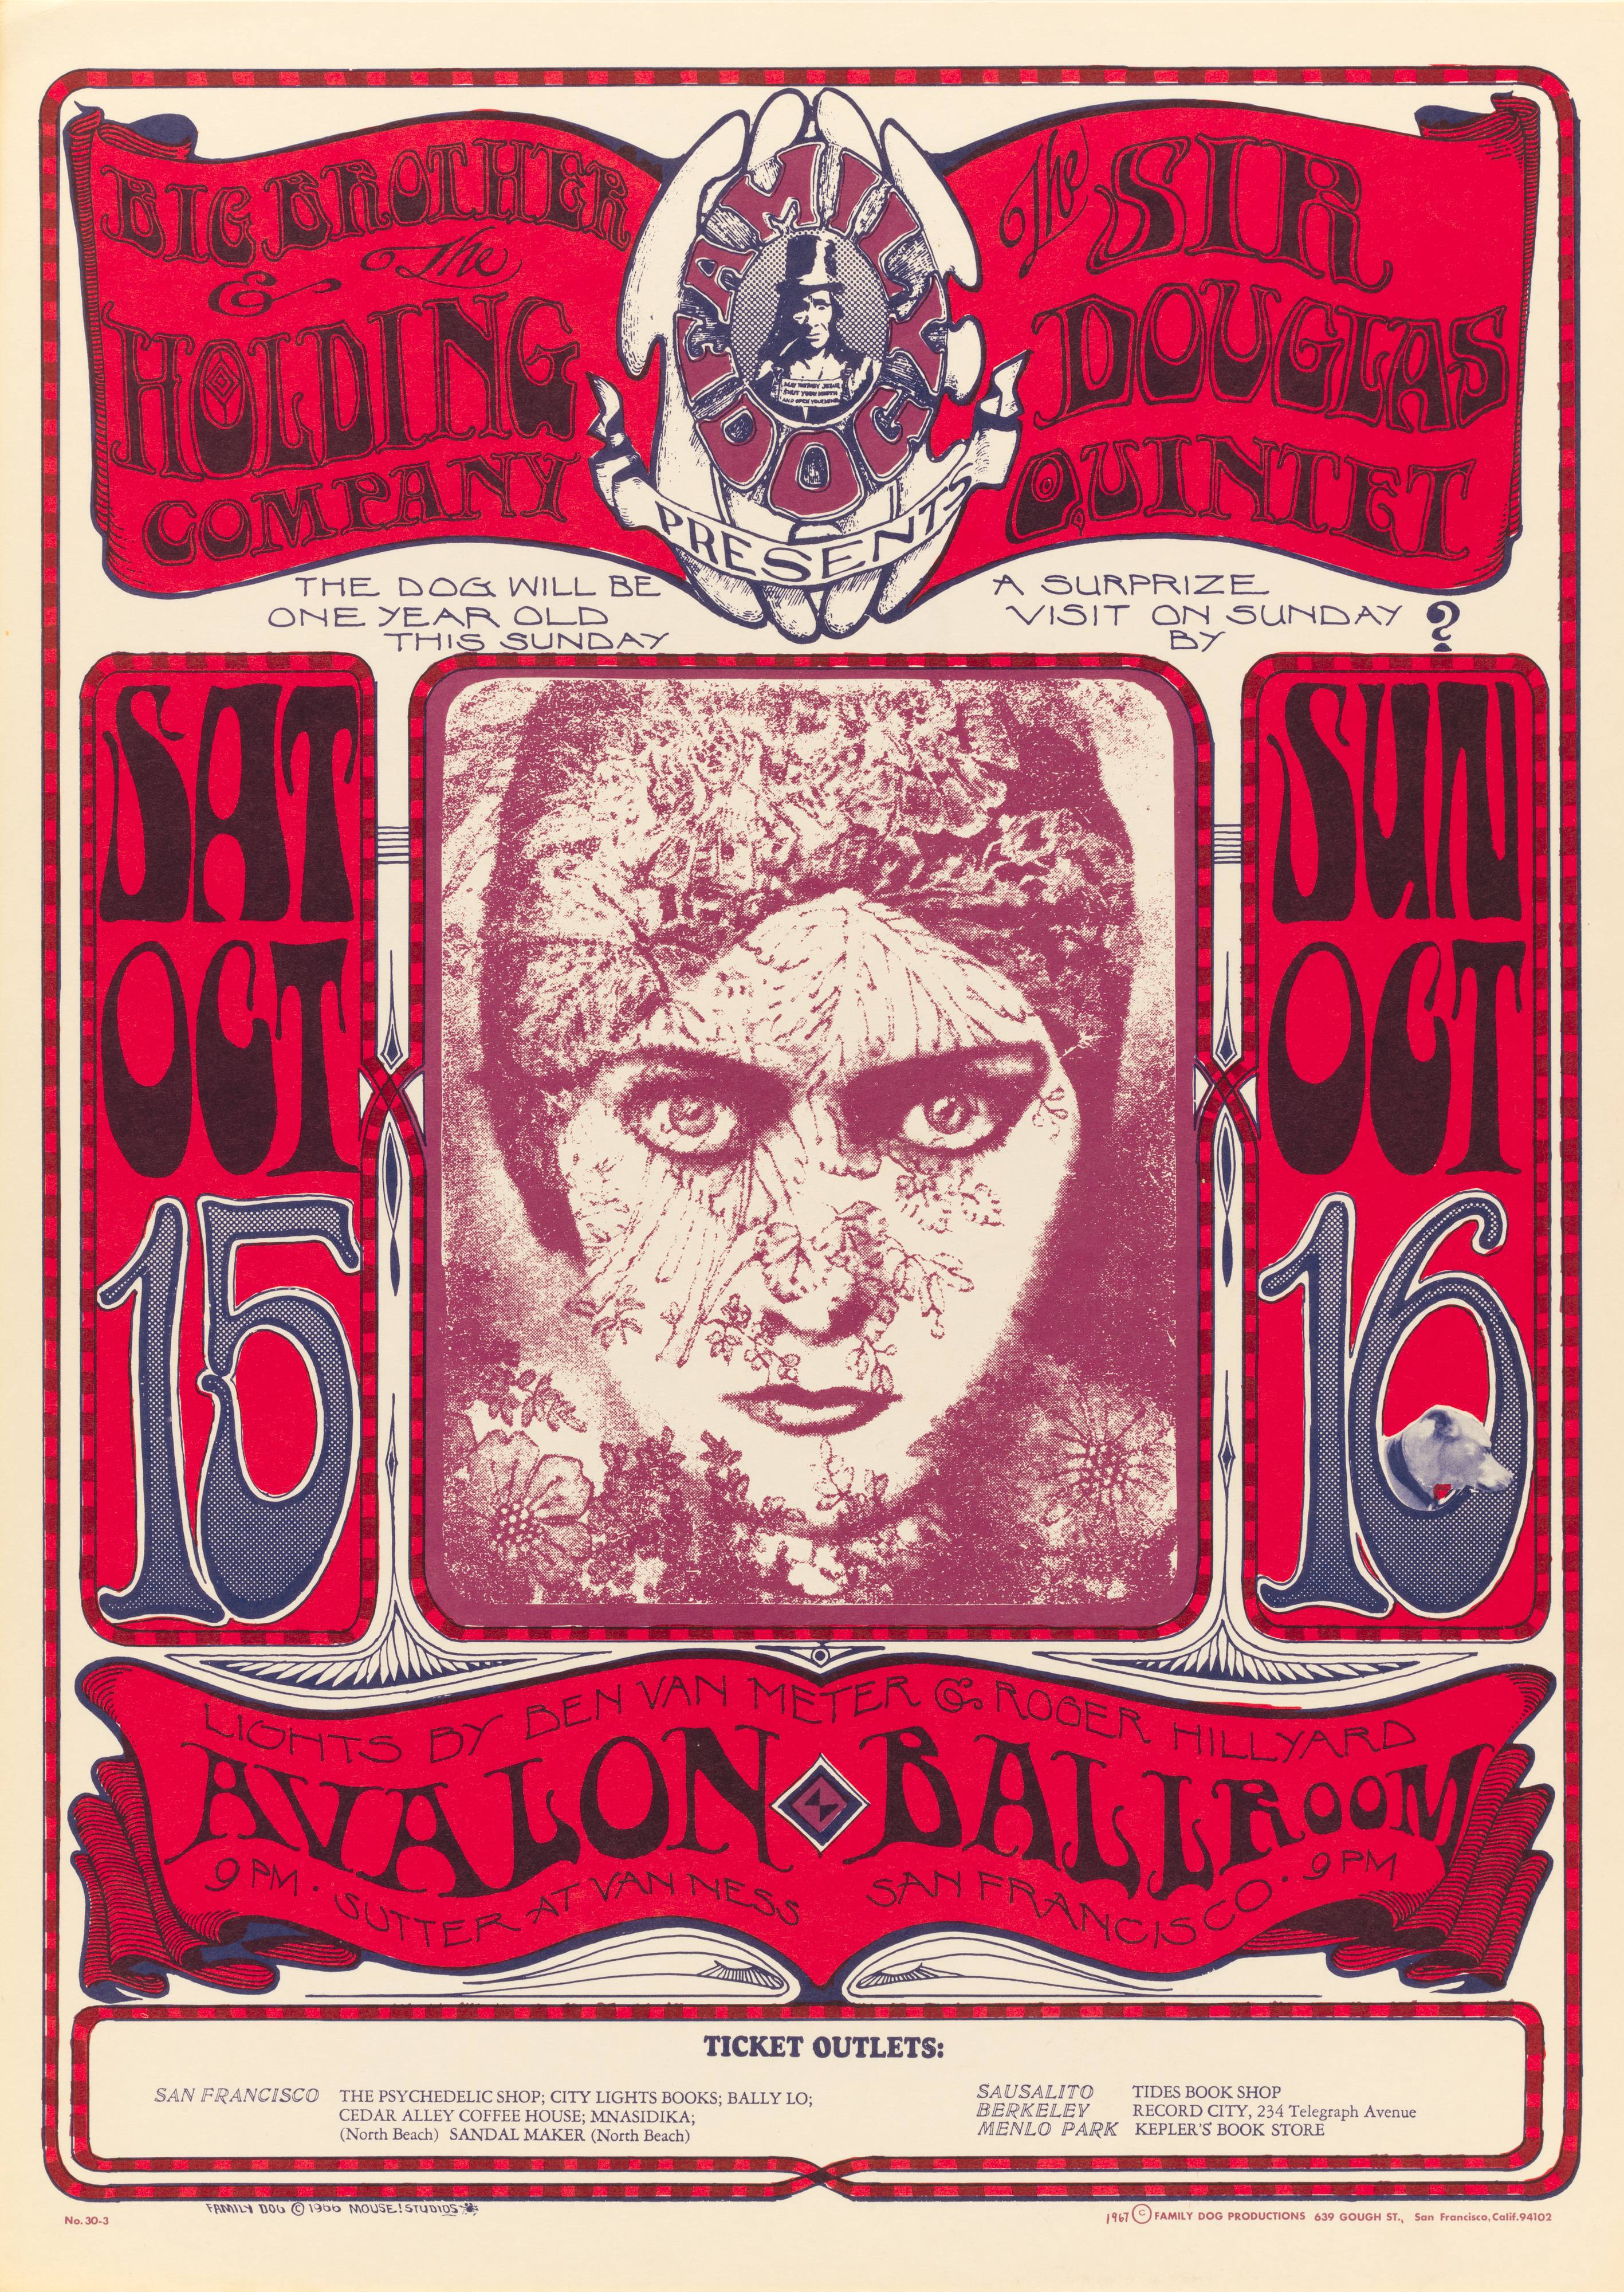 Big Brother and the Holding Company; Sir Douglas Quintet, Avalon Ballroom, October 15-16, 1966